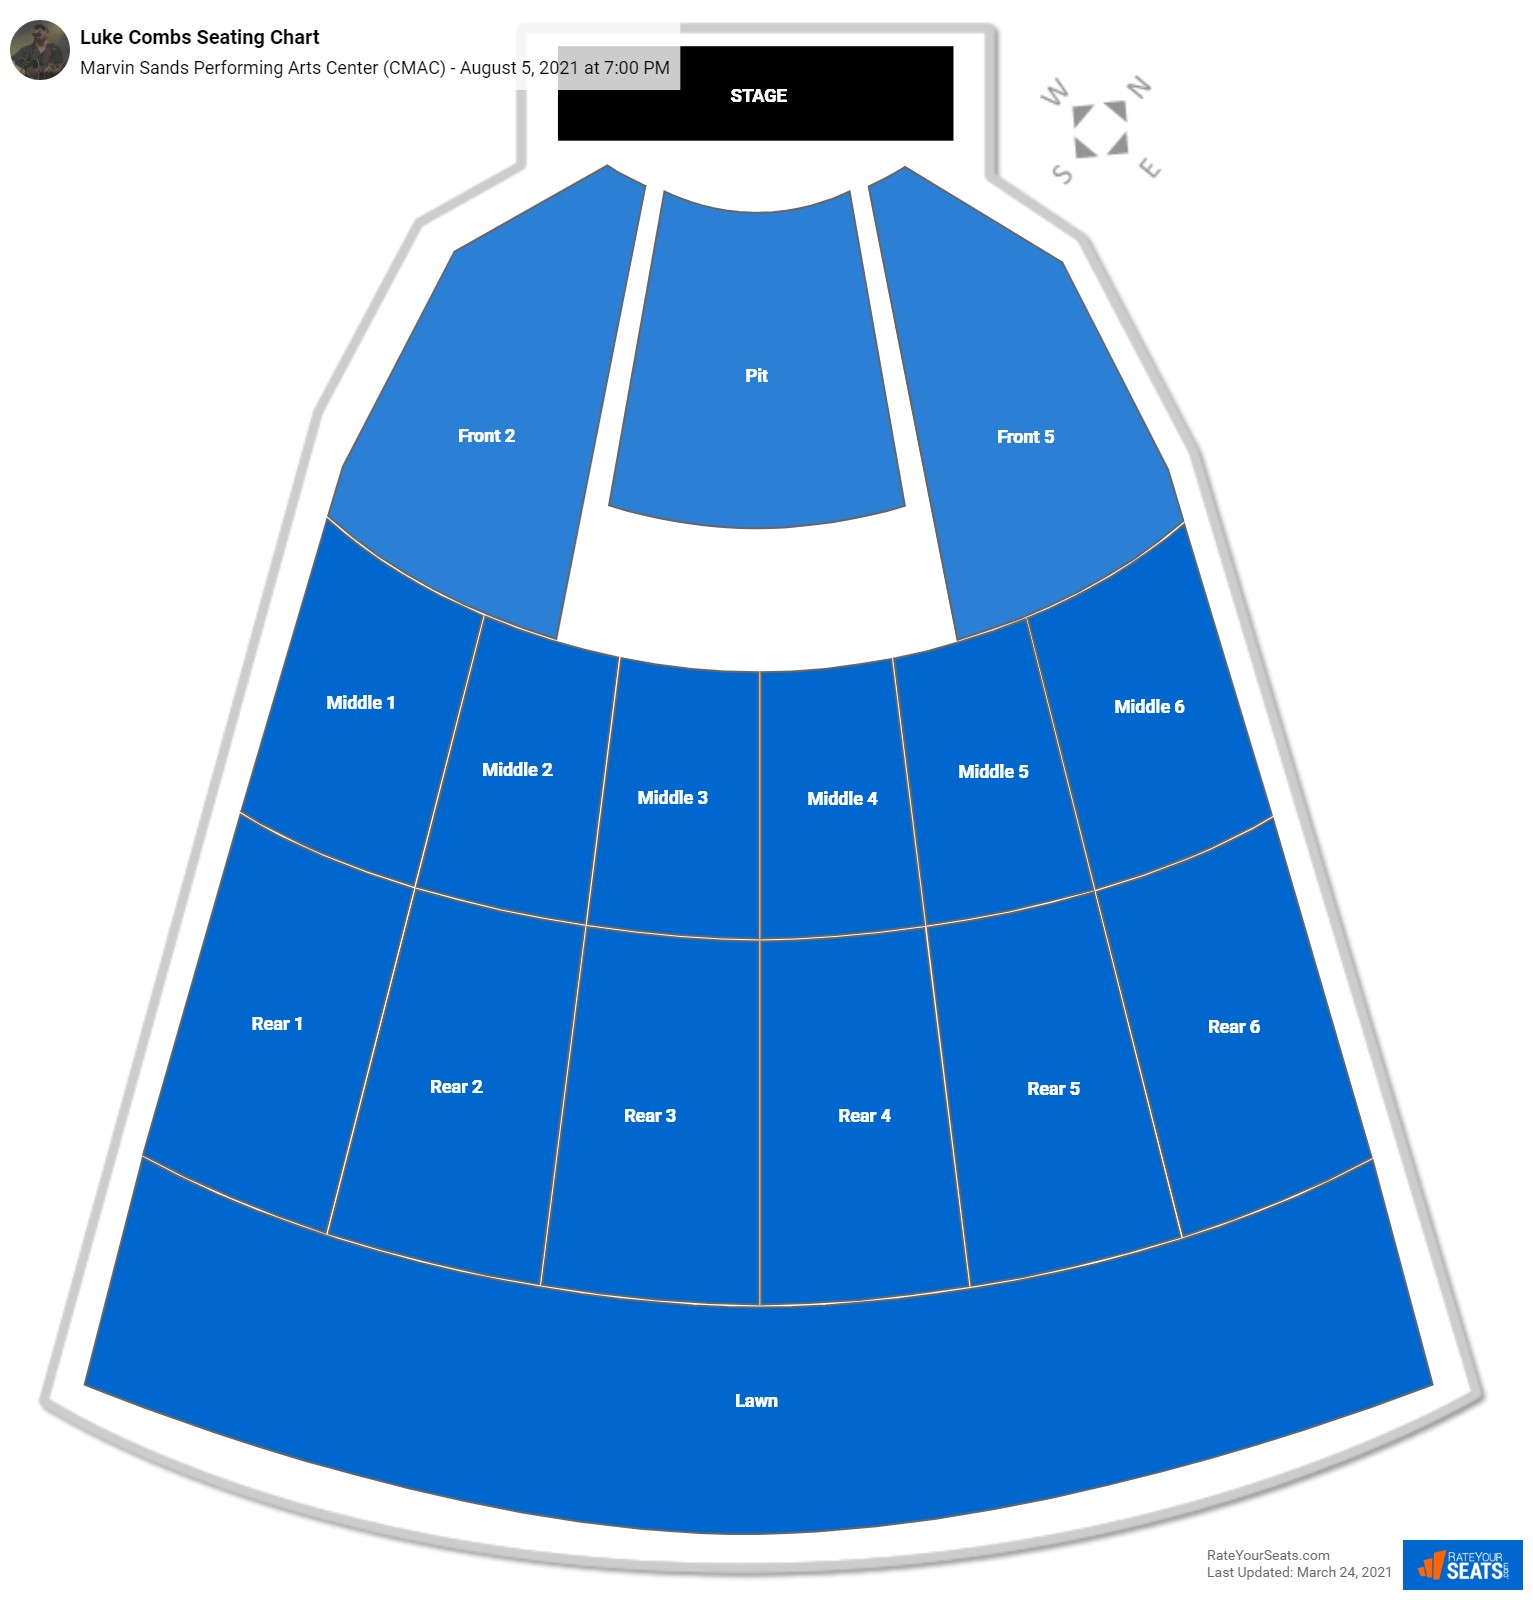 Marvin Sands Performing Arts Center Seating Chart - RateYourSeats.com